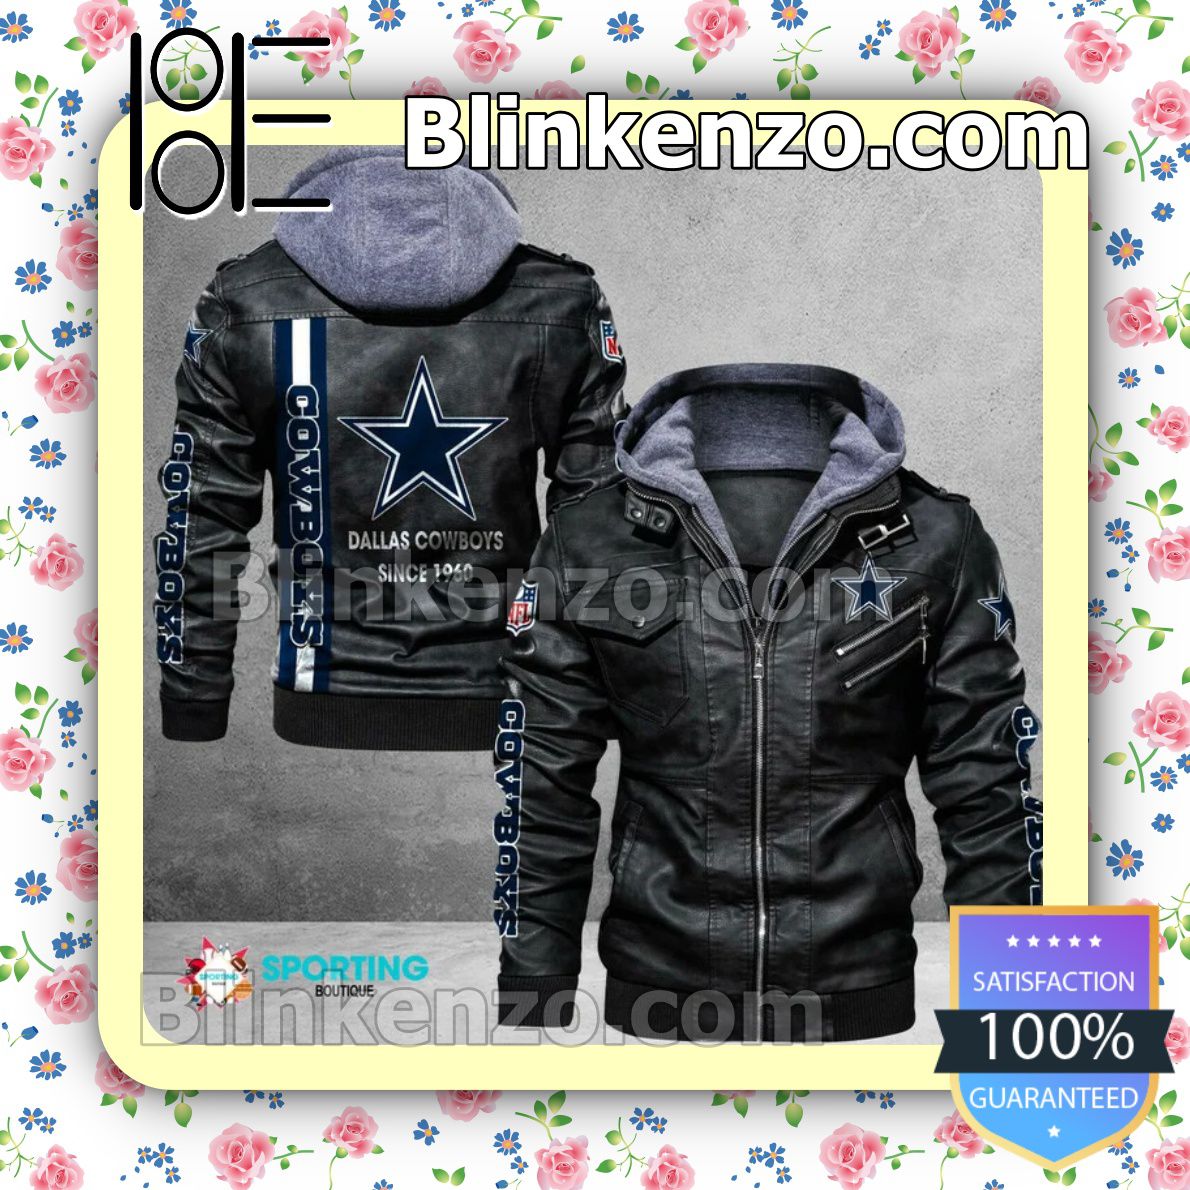 Nfl Dallas Cowboys Since 1960 Motorcycle Leather Jacket